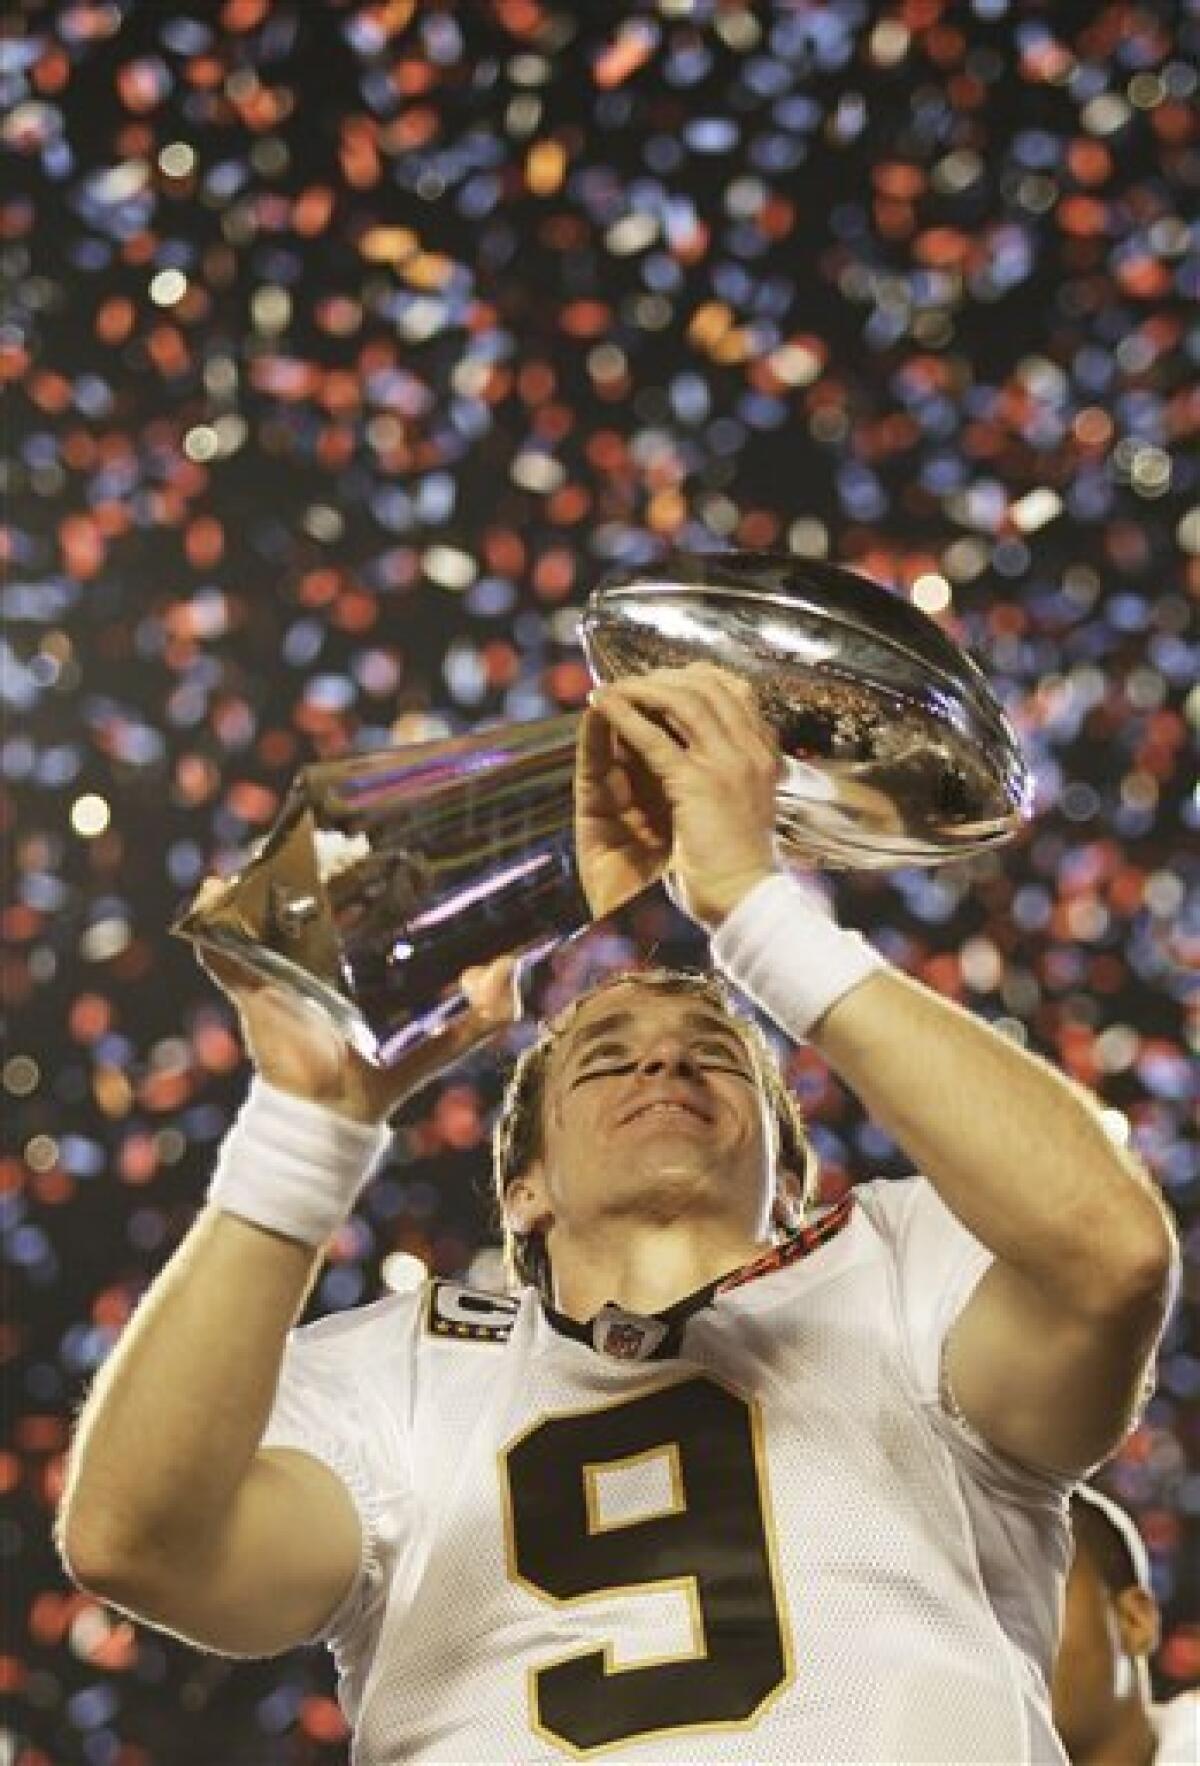 Saints win 1st NFL title by beating Colts 31-17 - The San Diego  Union-Tribune